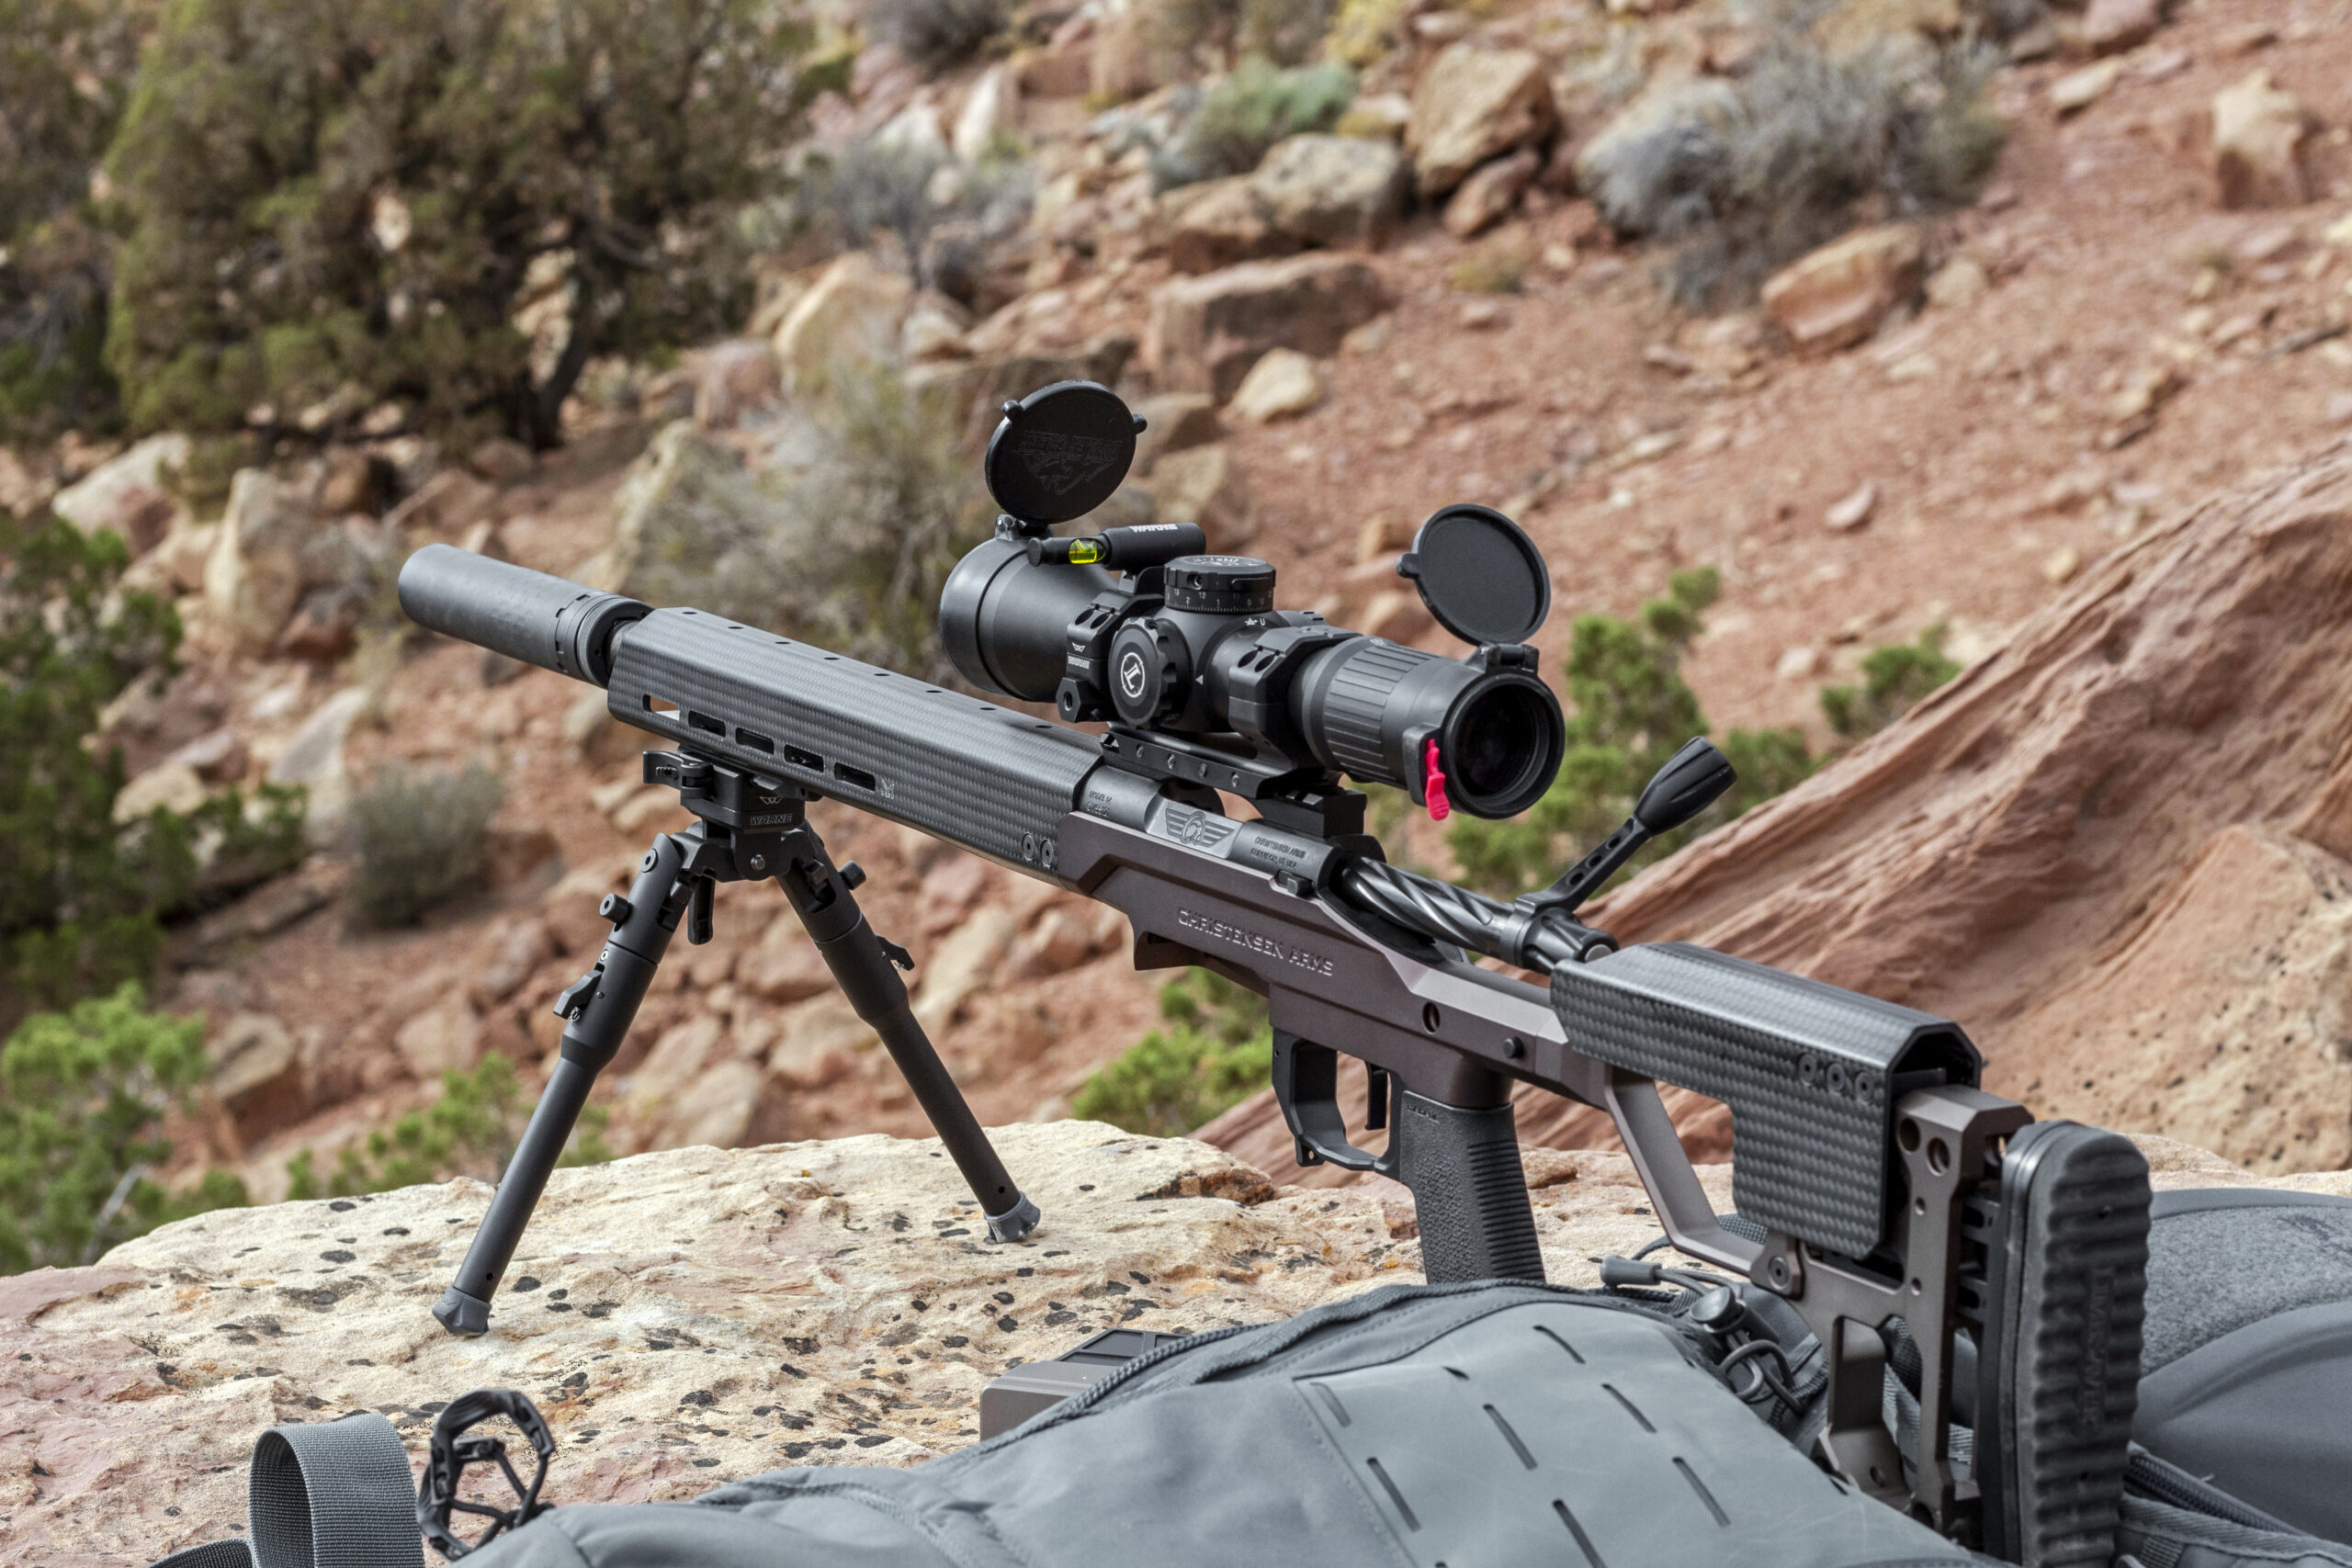 [EMBARGO 1/15]Adaptable, Affordable, Durable - The New Warne Skyline Lite Bipod